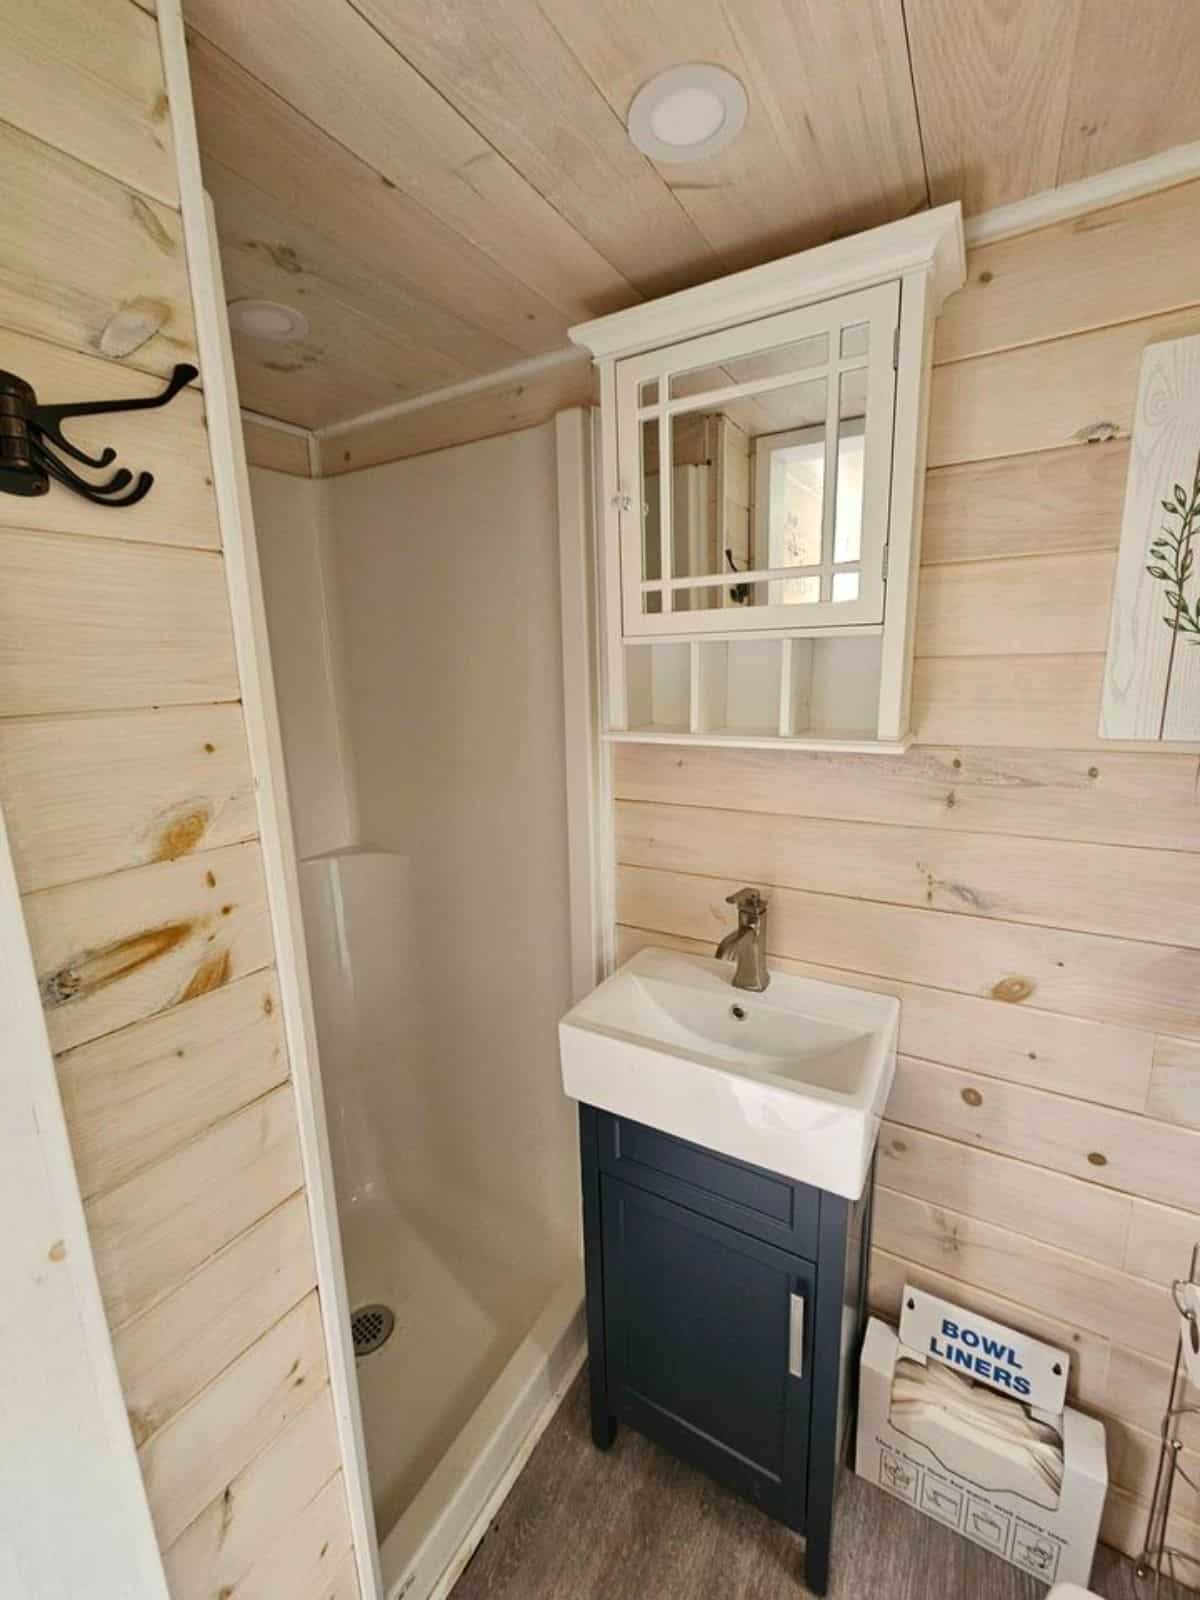 bathroom of CSA certified tiny home has all the standard fittings